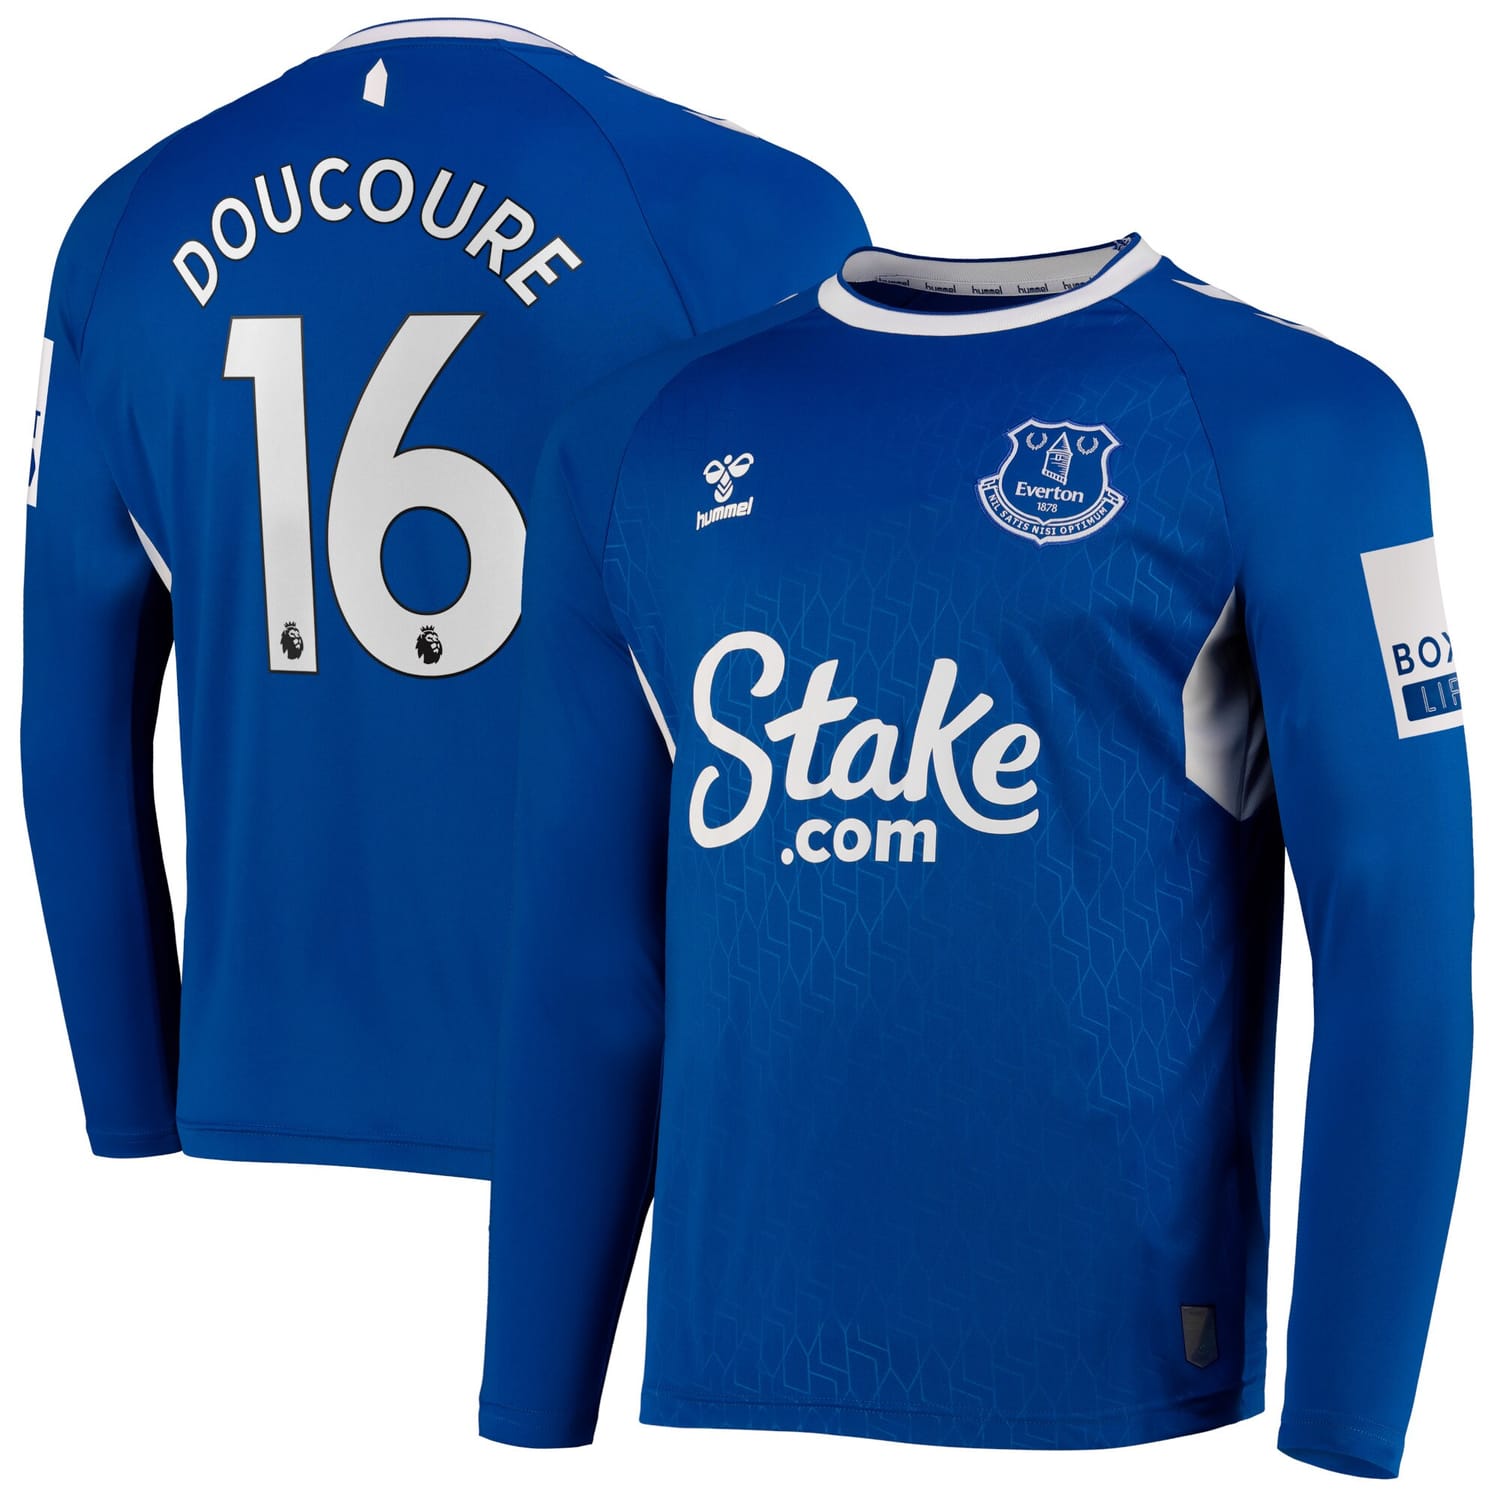 Premier League Everton Home Jersey Shirt Long Sleeve 2022-23 player Abdoulaye Doucouré 16 printing for Men